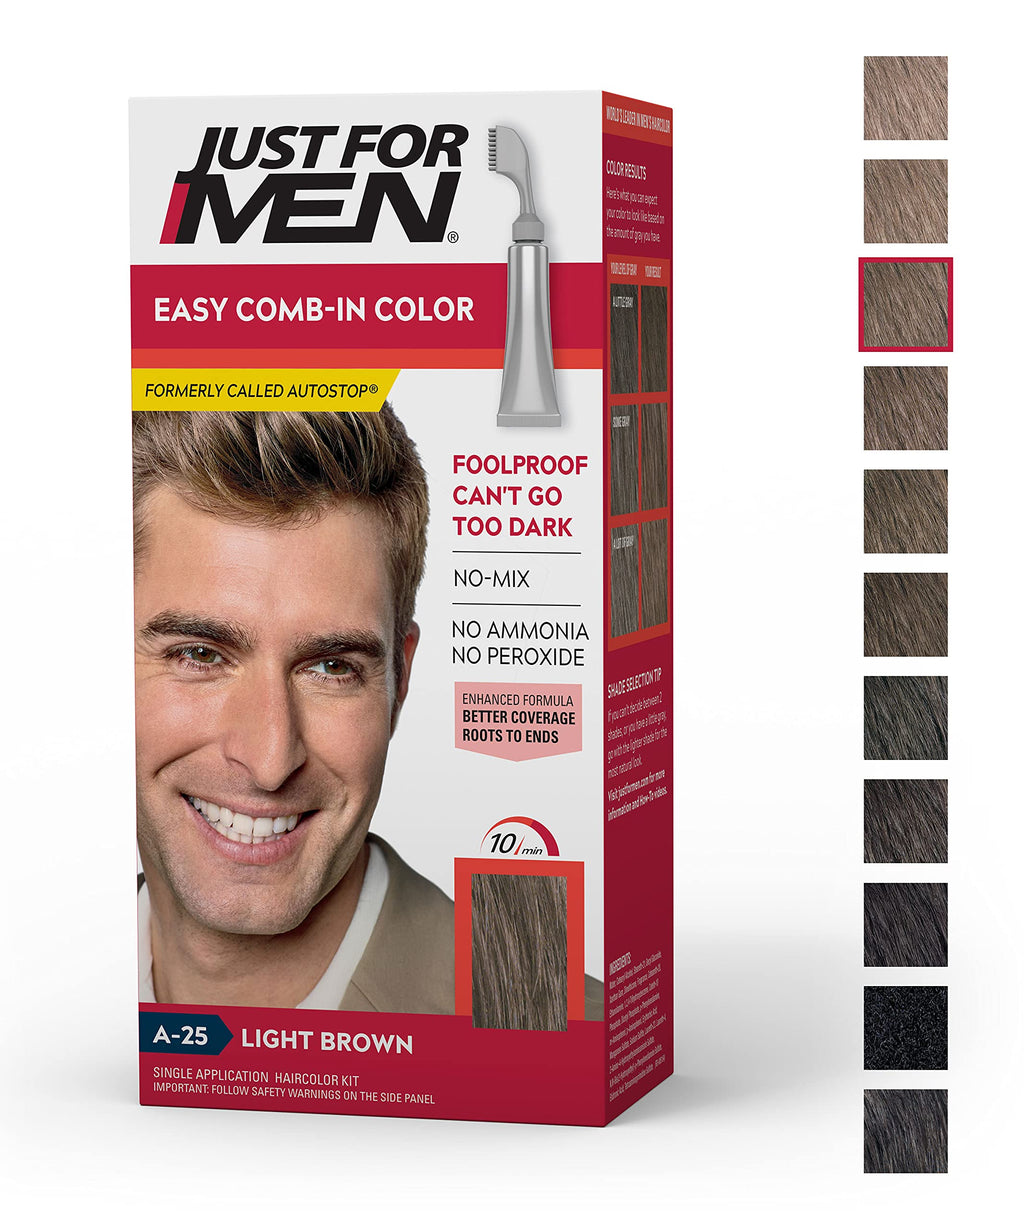 [Australia] - Just For Men Easy Comb-In Color (Formerly Autostop), Gray Hair Coloring for Men with Comb Applicator - Light Brown, A-25 (Packaging May Vary) Pack of 1 